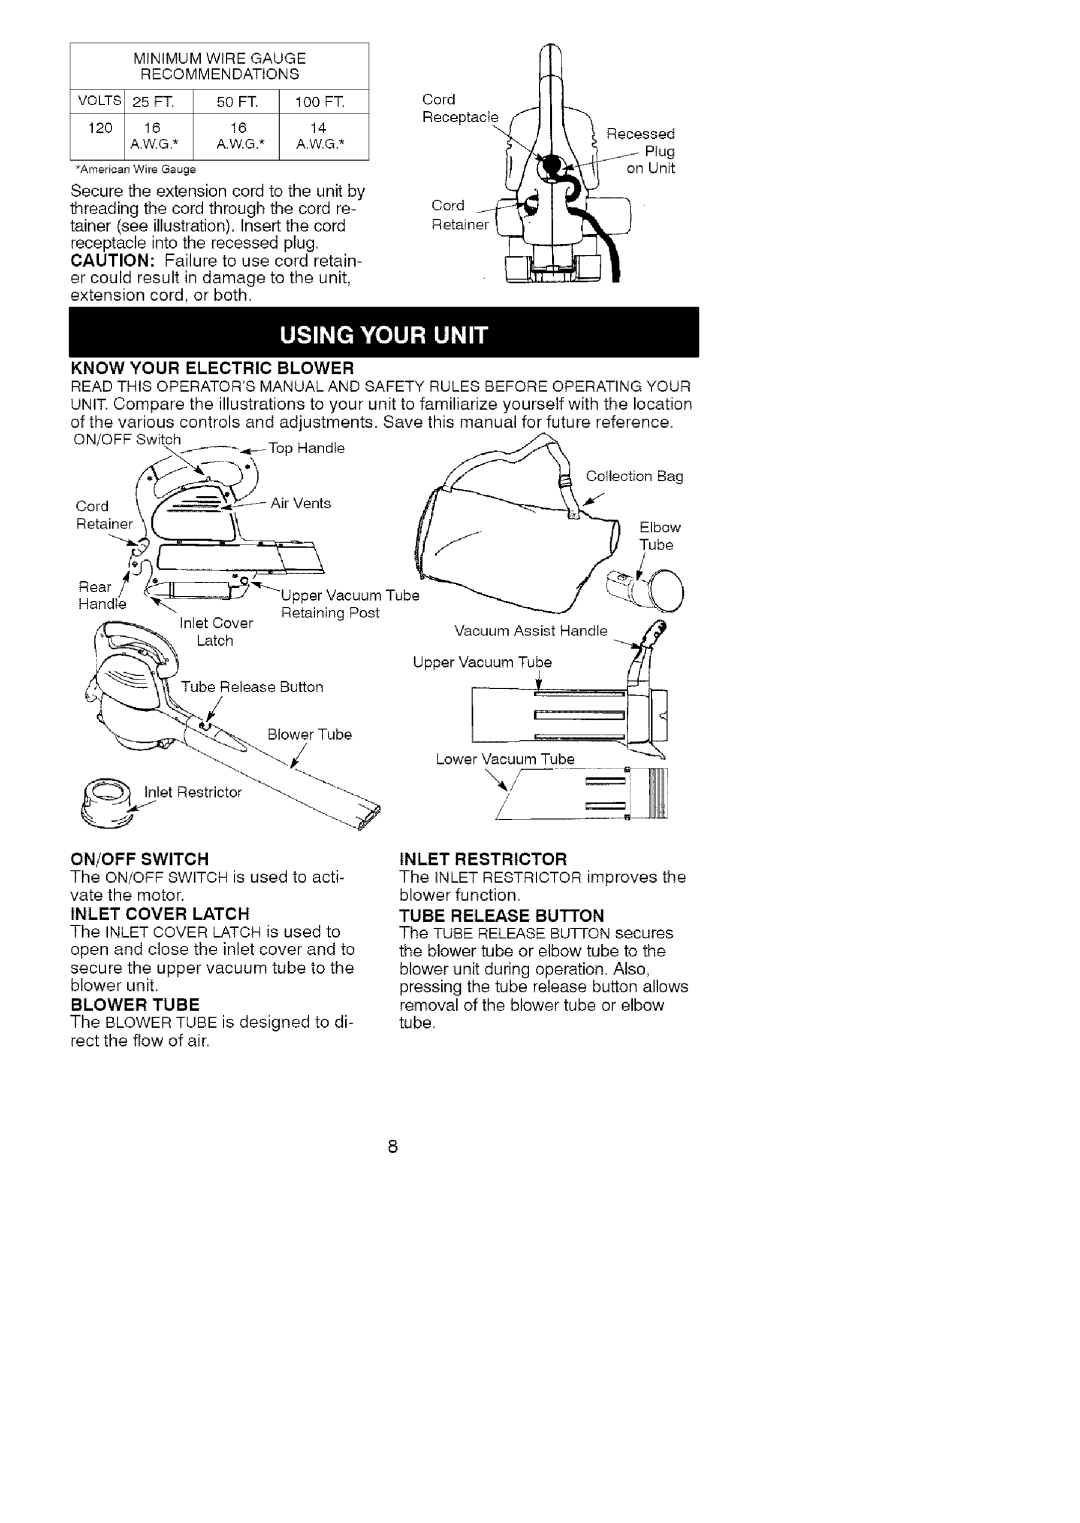 Craftsman 74822 manual Minimumwiregauge Recommendations, Know Your Electric Blower, Inlet Restrictor, Tube Release Button 